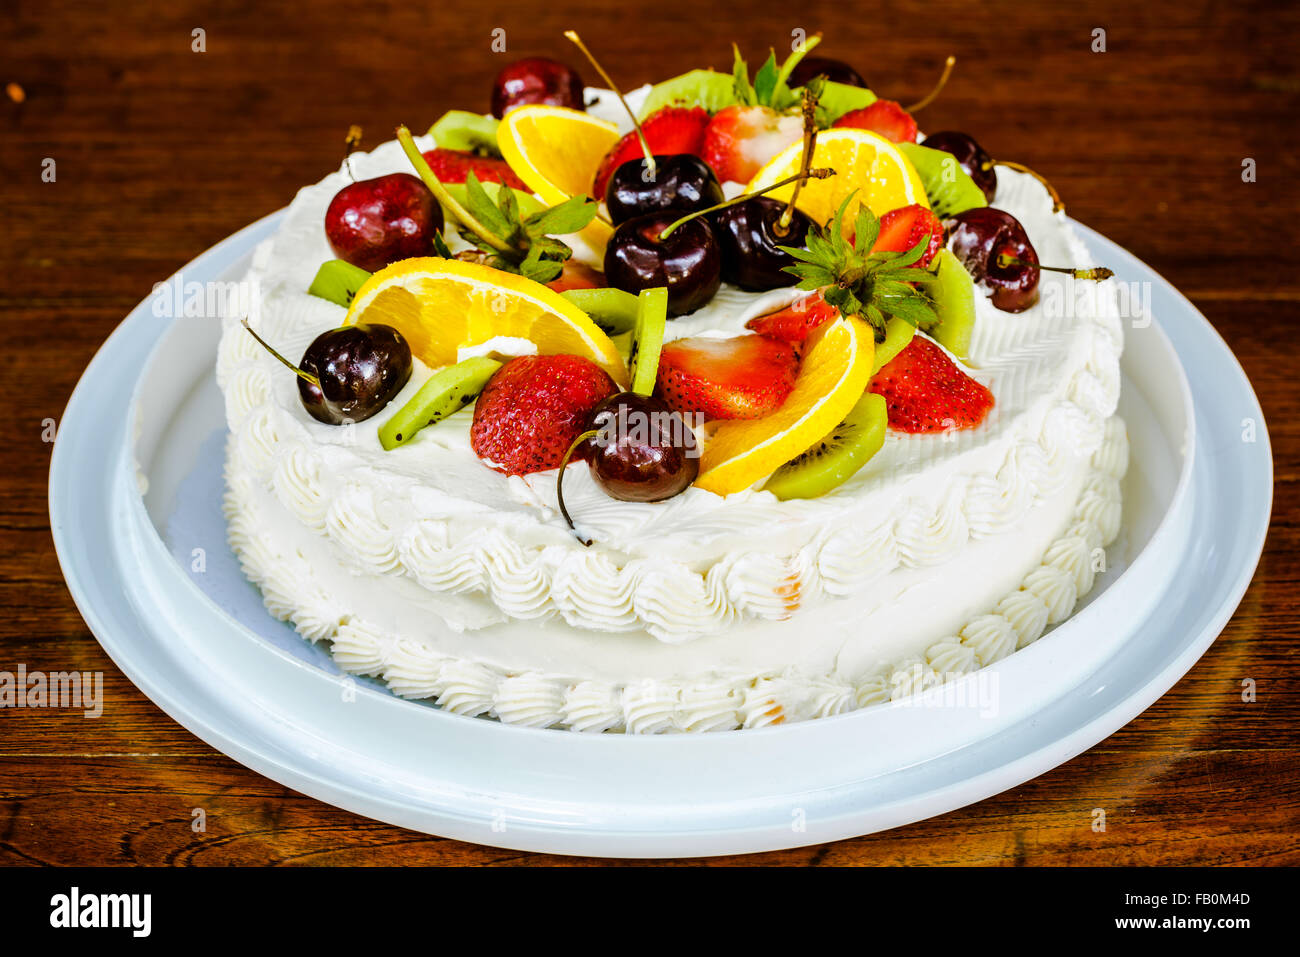 New Year Cake garnished with different kind of fruits Stock Photo